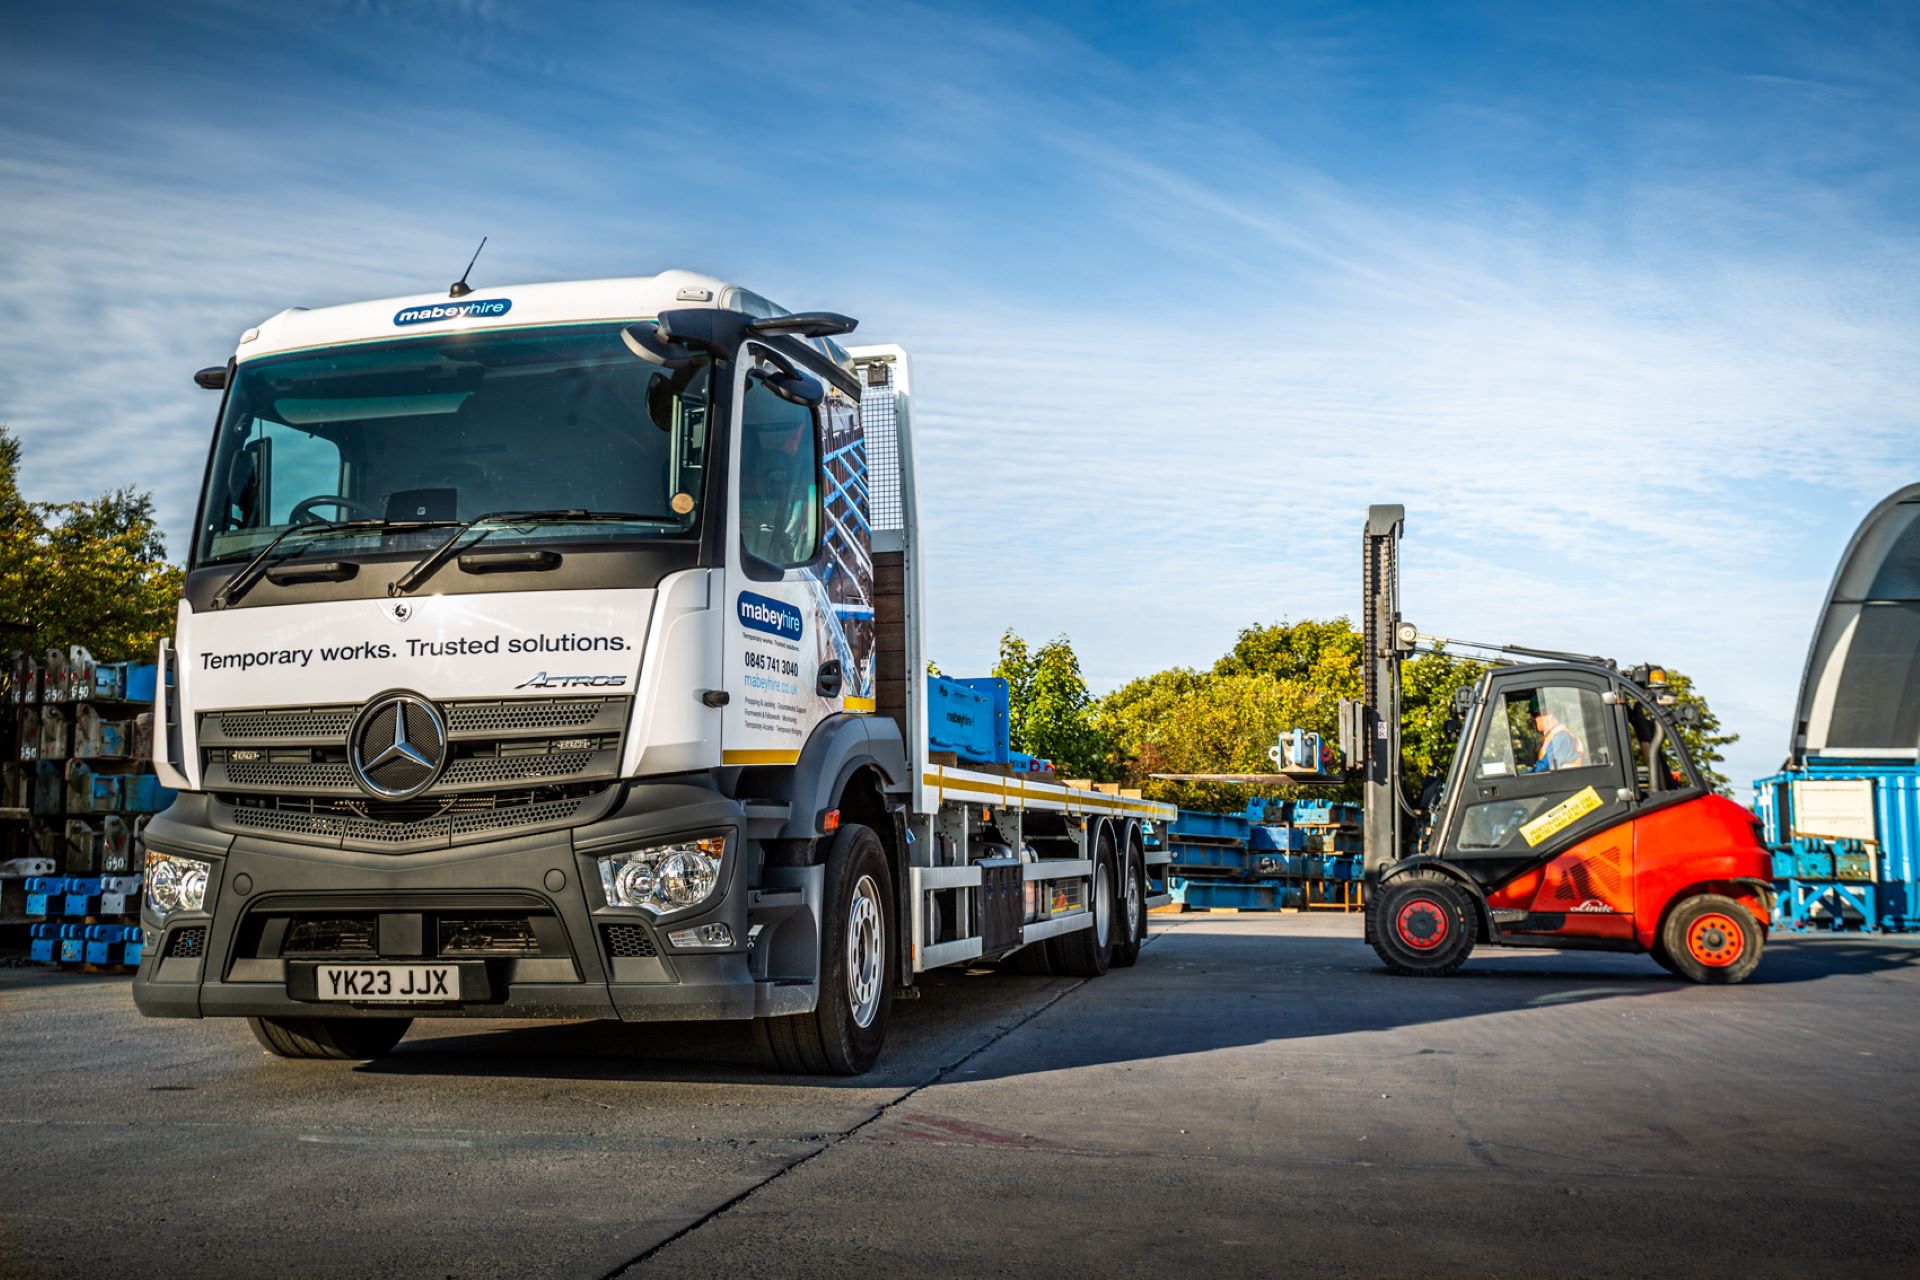 Mercedes Benz Safety Makes Actros A Definite Winner For Mabey Hire